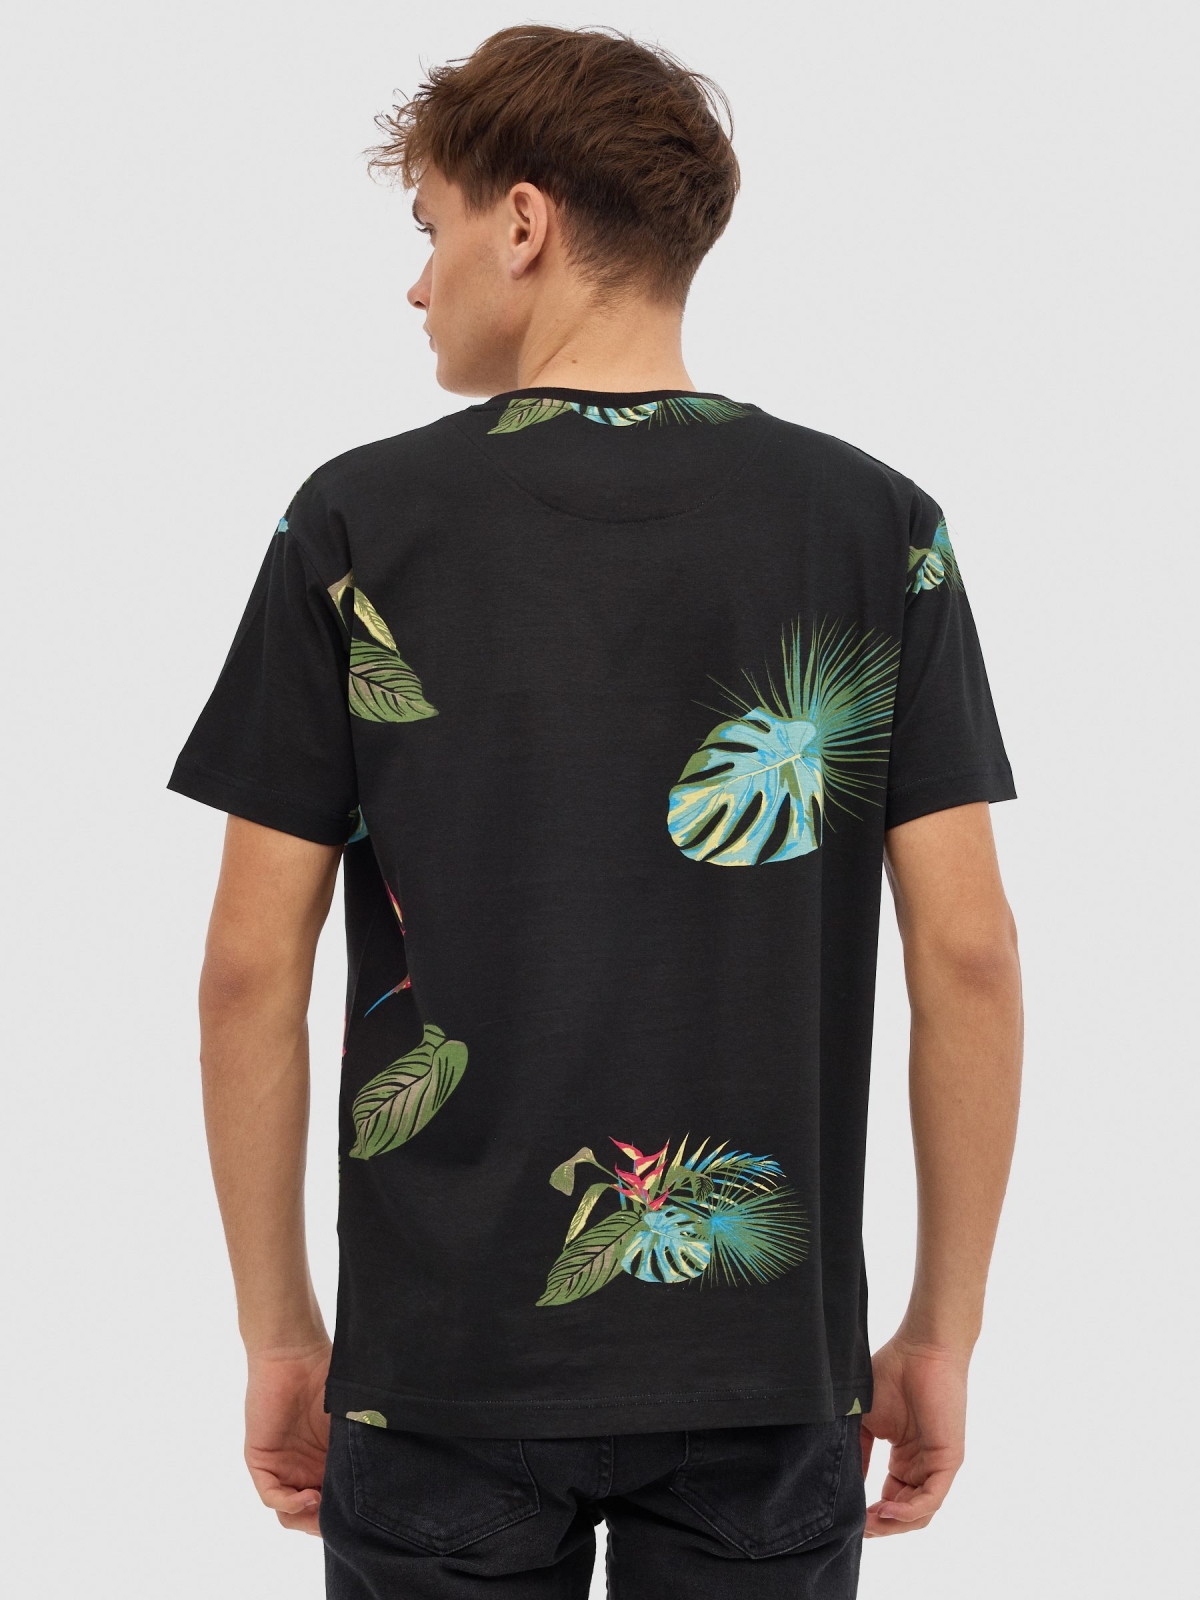 Monstera T-shirt black middle back view